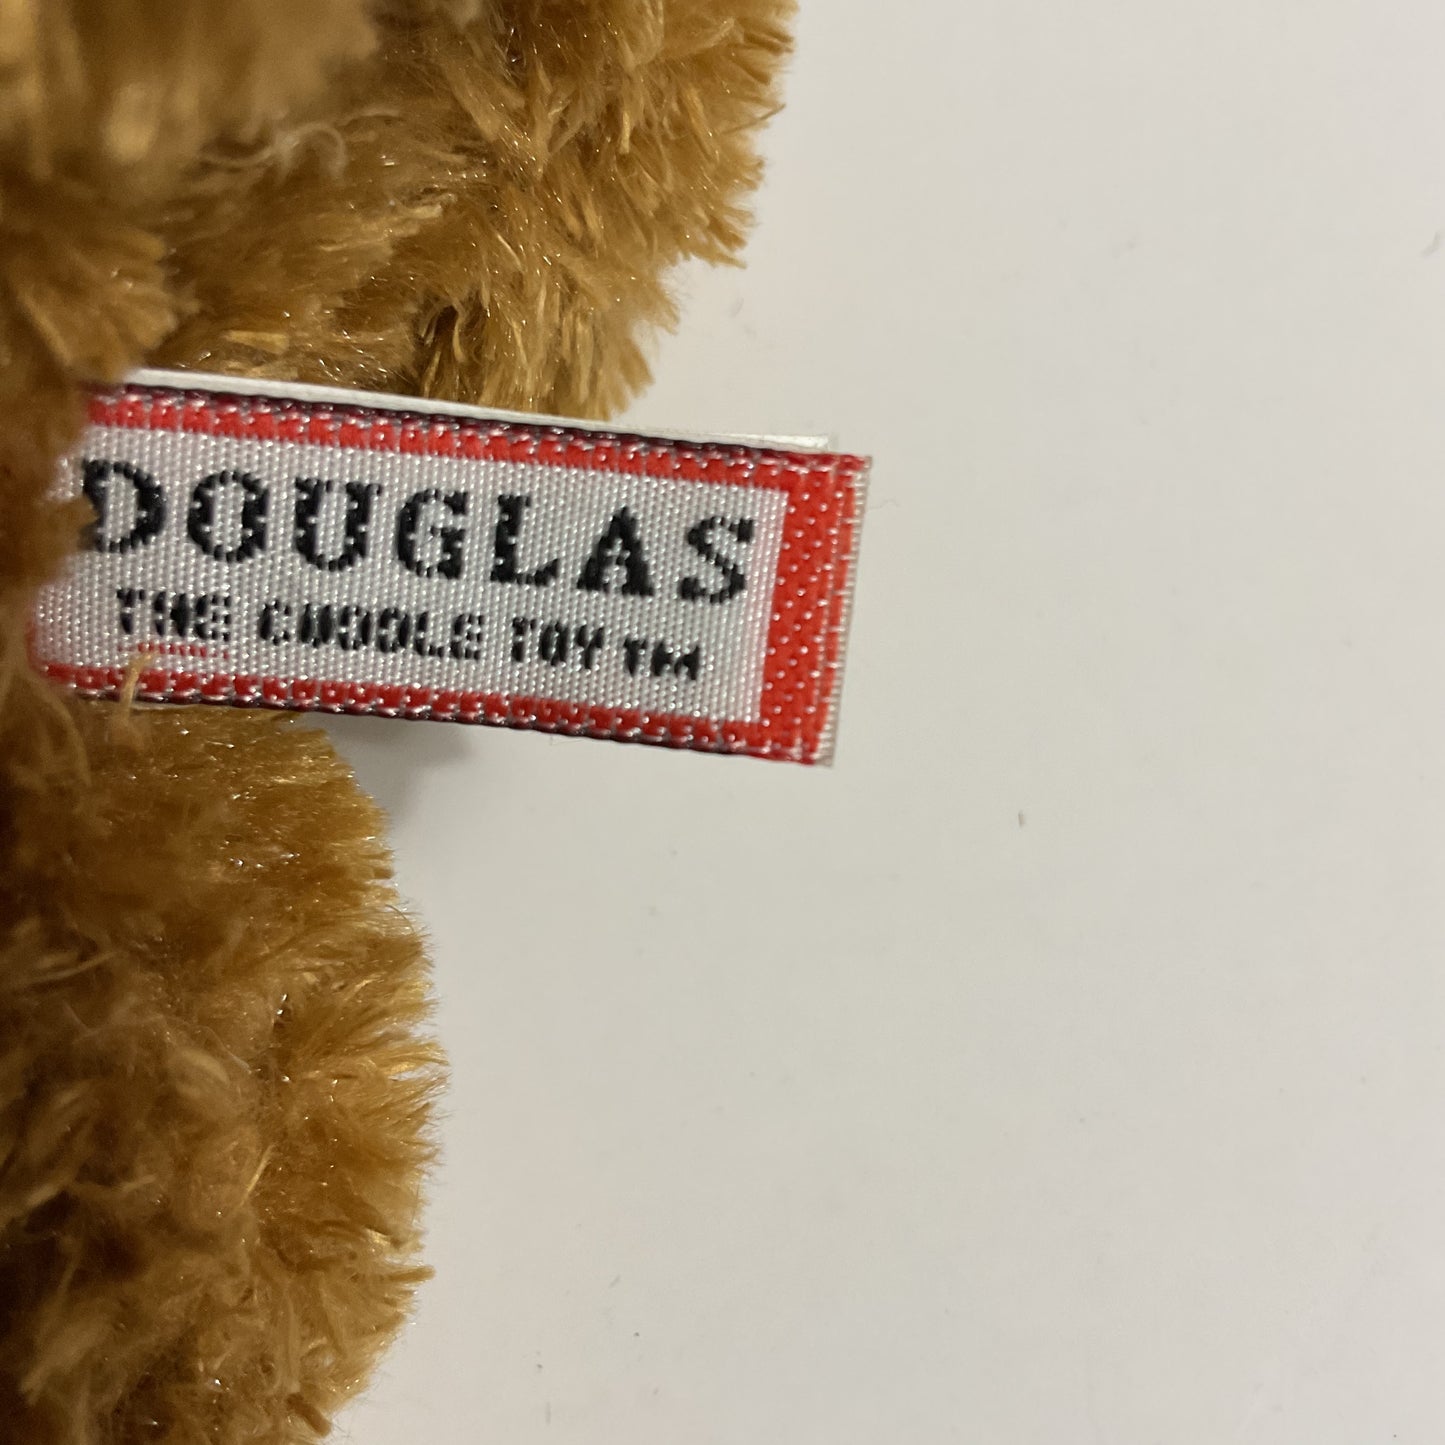 Douglas Airedale Terrier The Cuddle Toy.